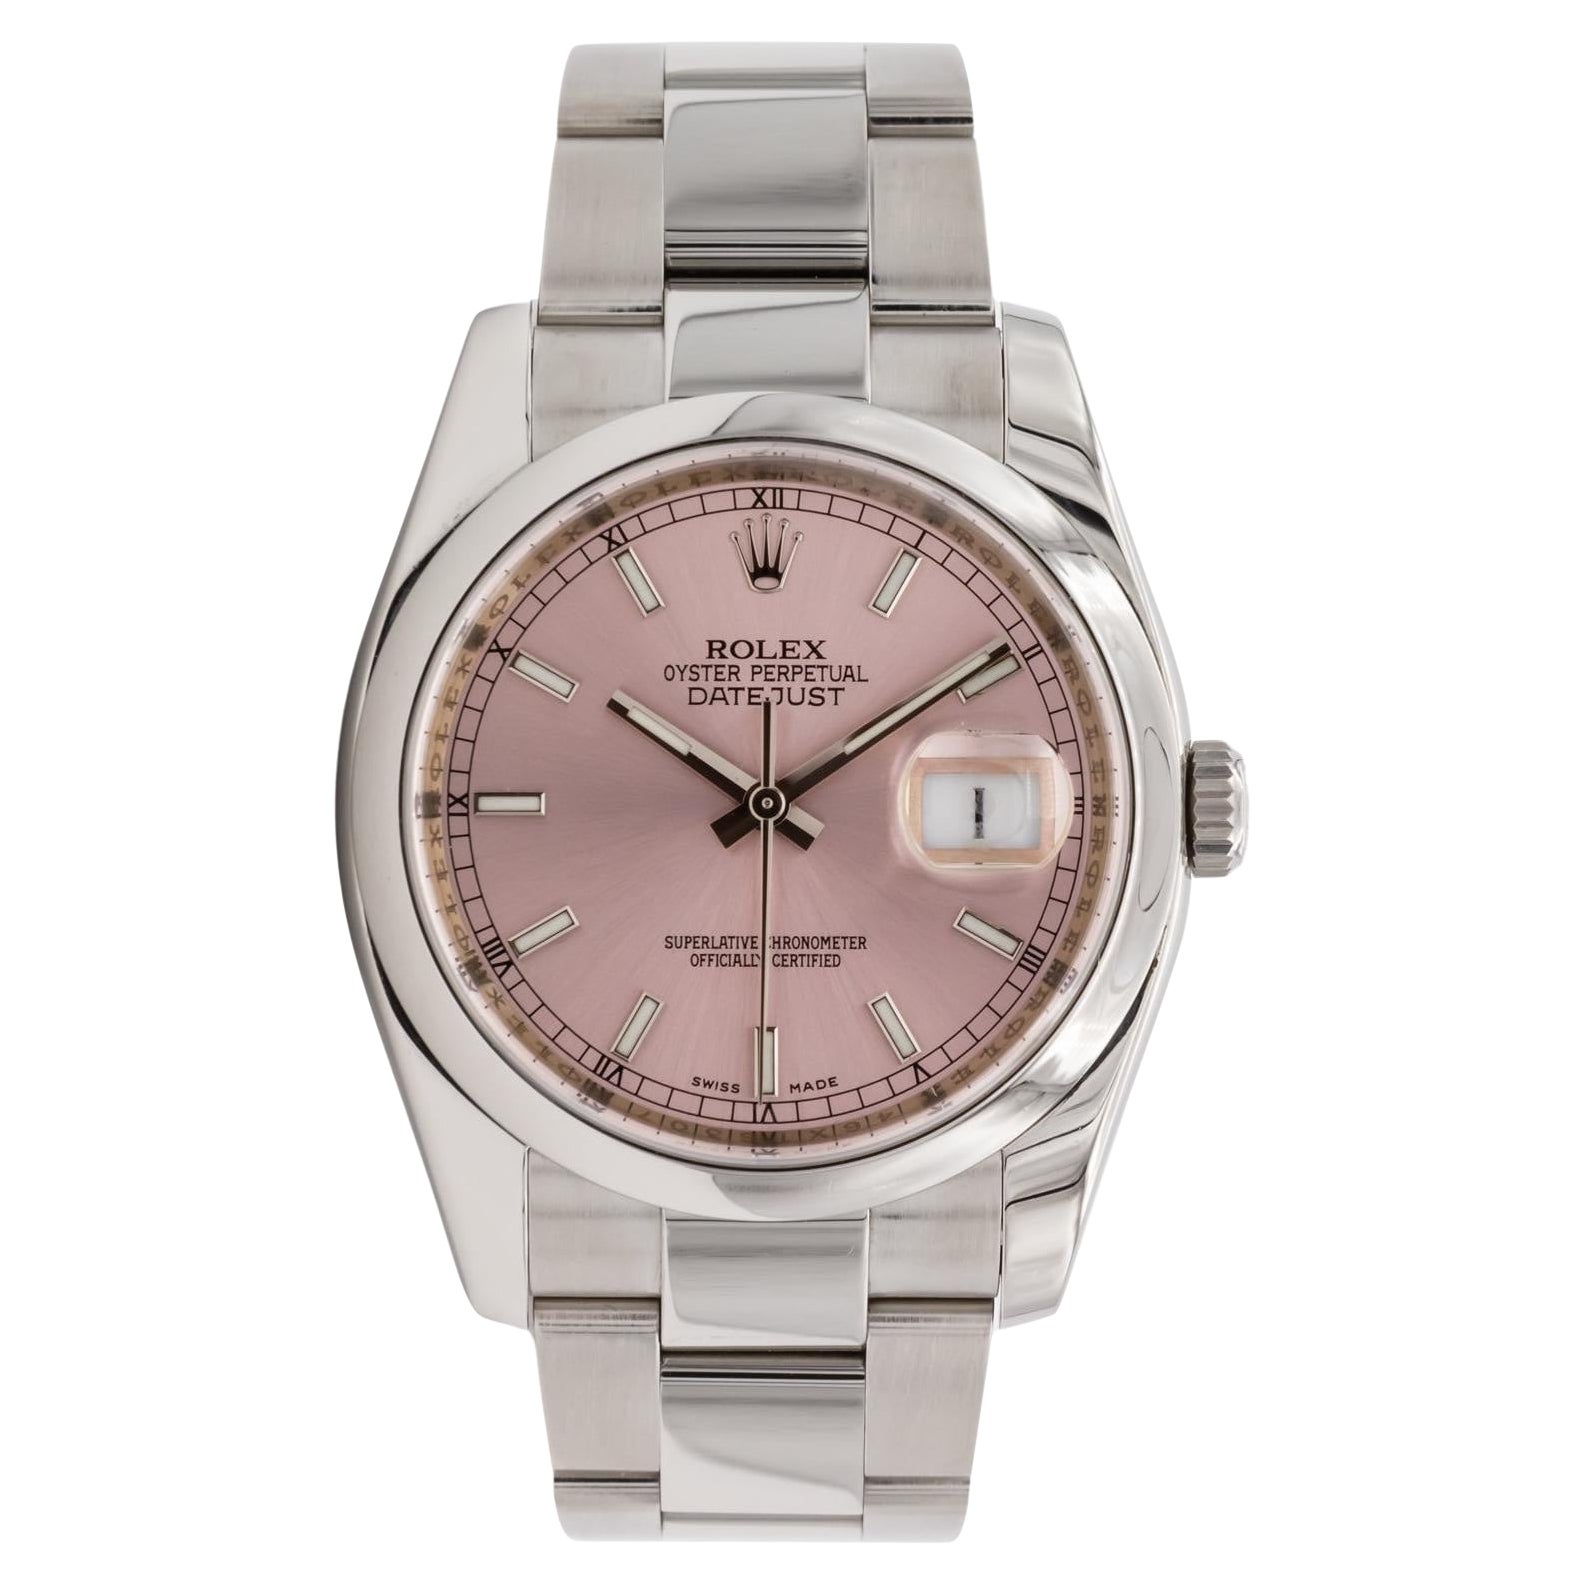 Rolex Stainless Steel Datejust 36mm With Rare Pink Dial 116200 For Sale